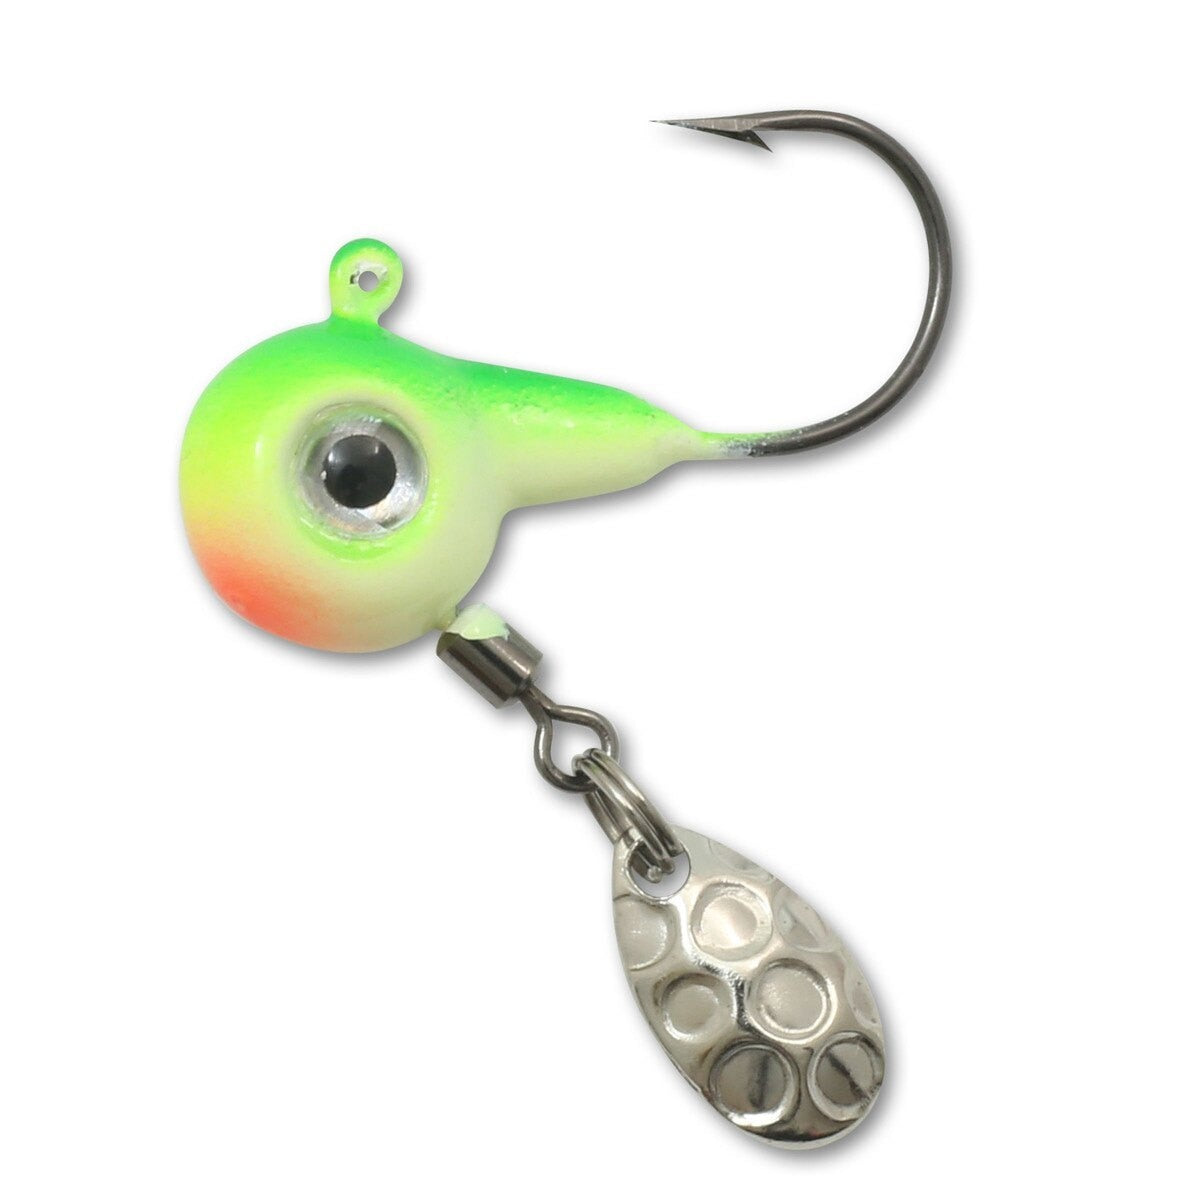 Coolbaits Blue Shad Down Under Underspin 3/16 oz